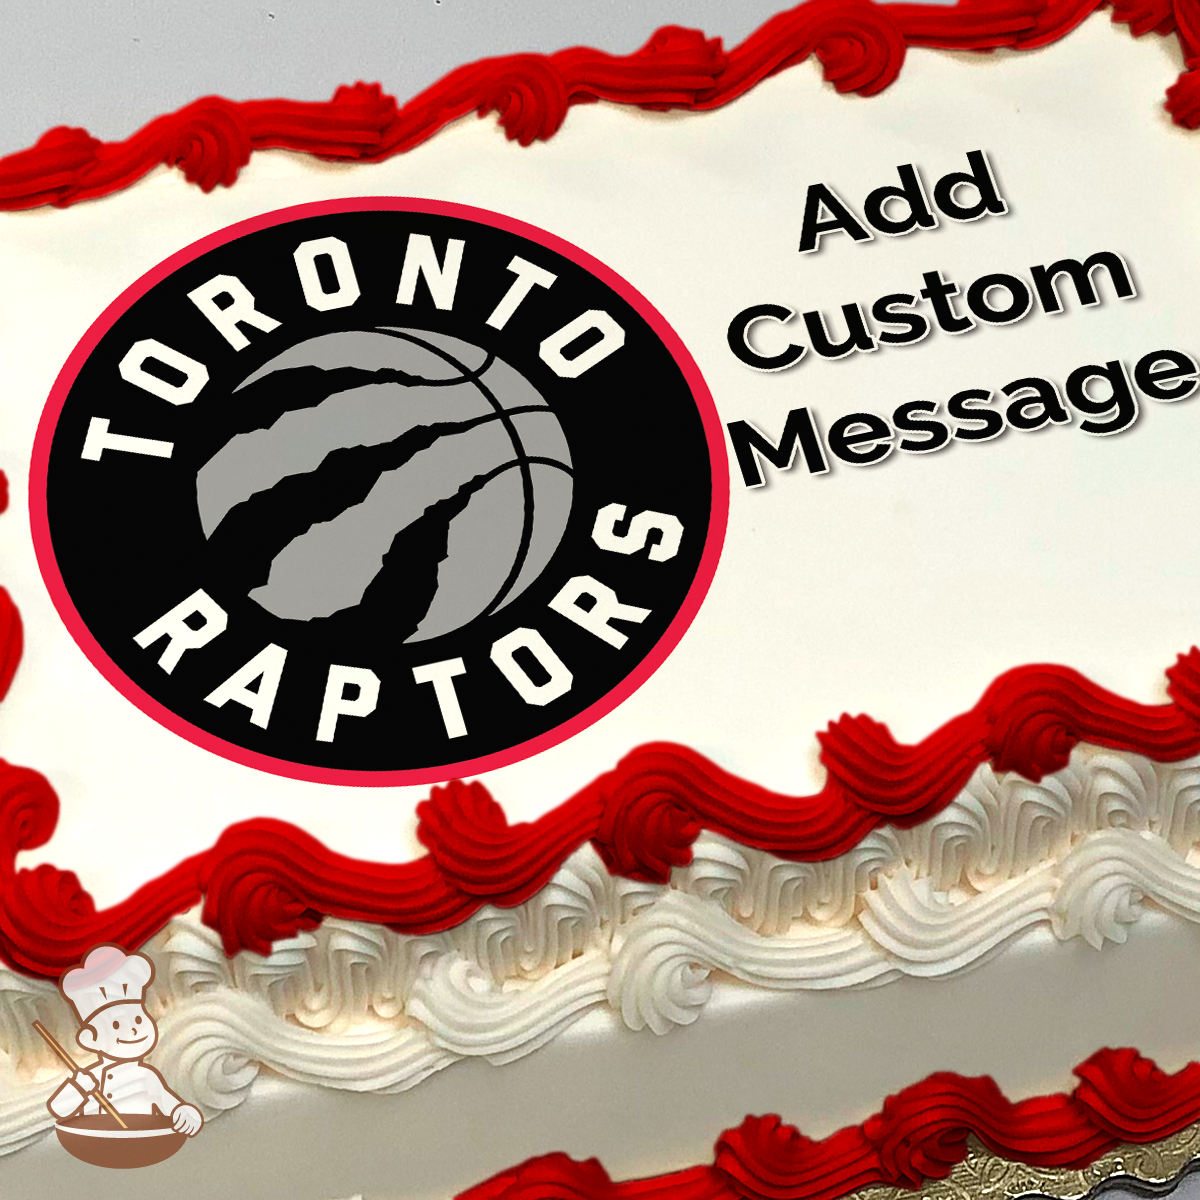 Cakes for Children's Parties in Toronto - 647-914-2239